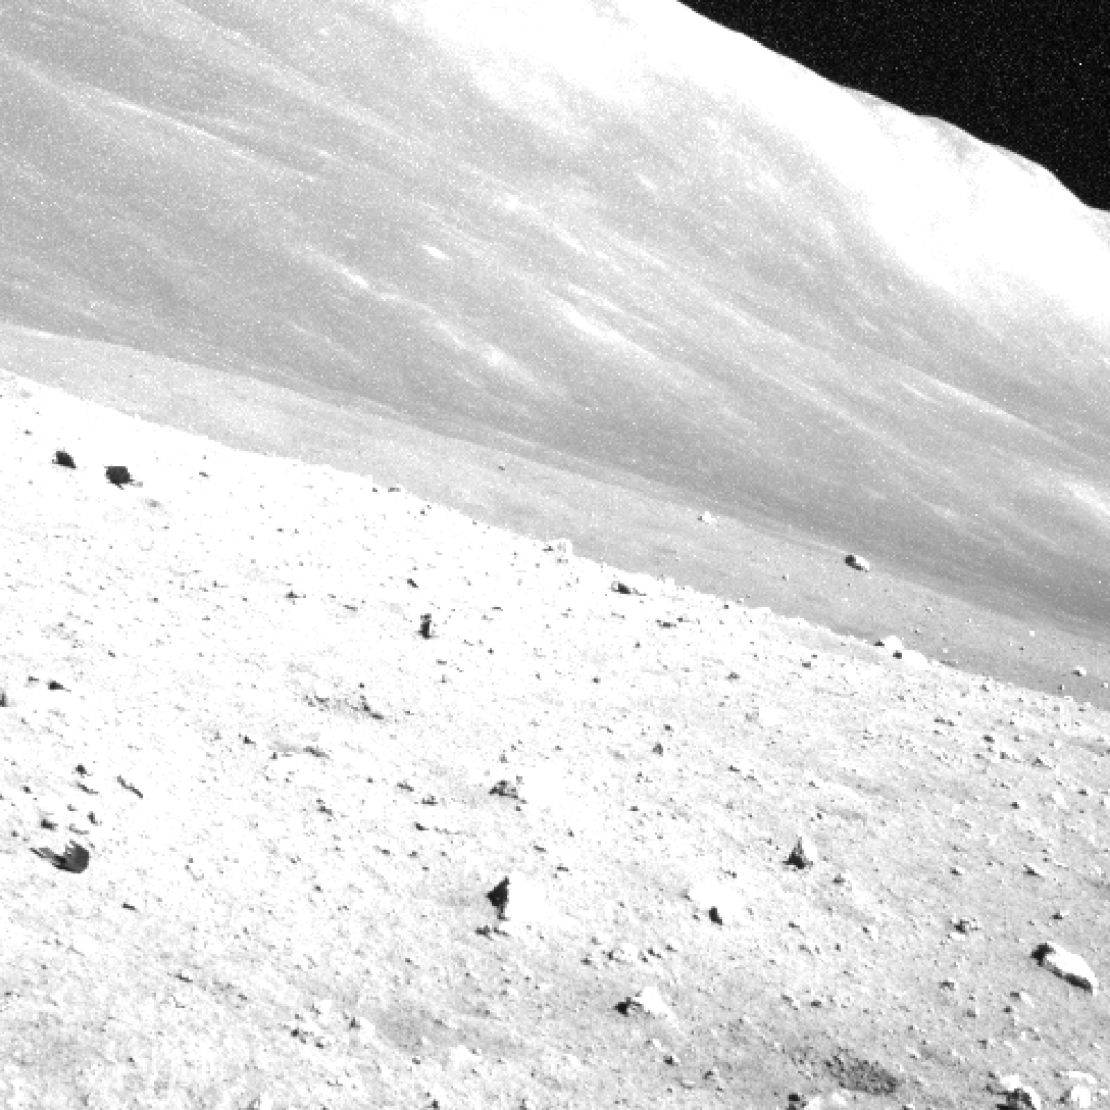 Moon Sniper took a new image of its landing site, which appears bright during lunar daytime.